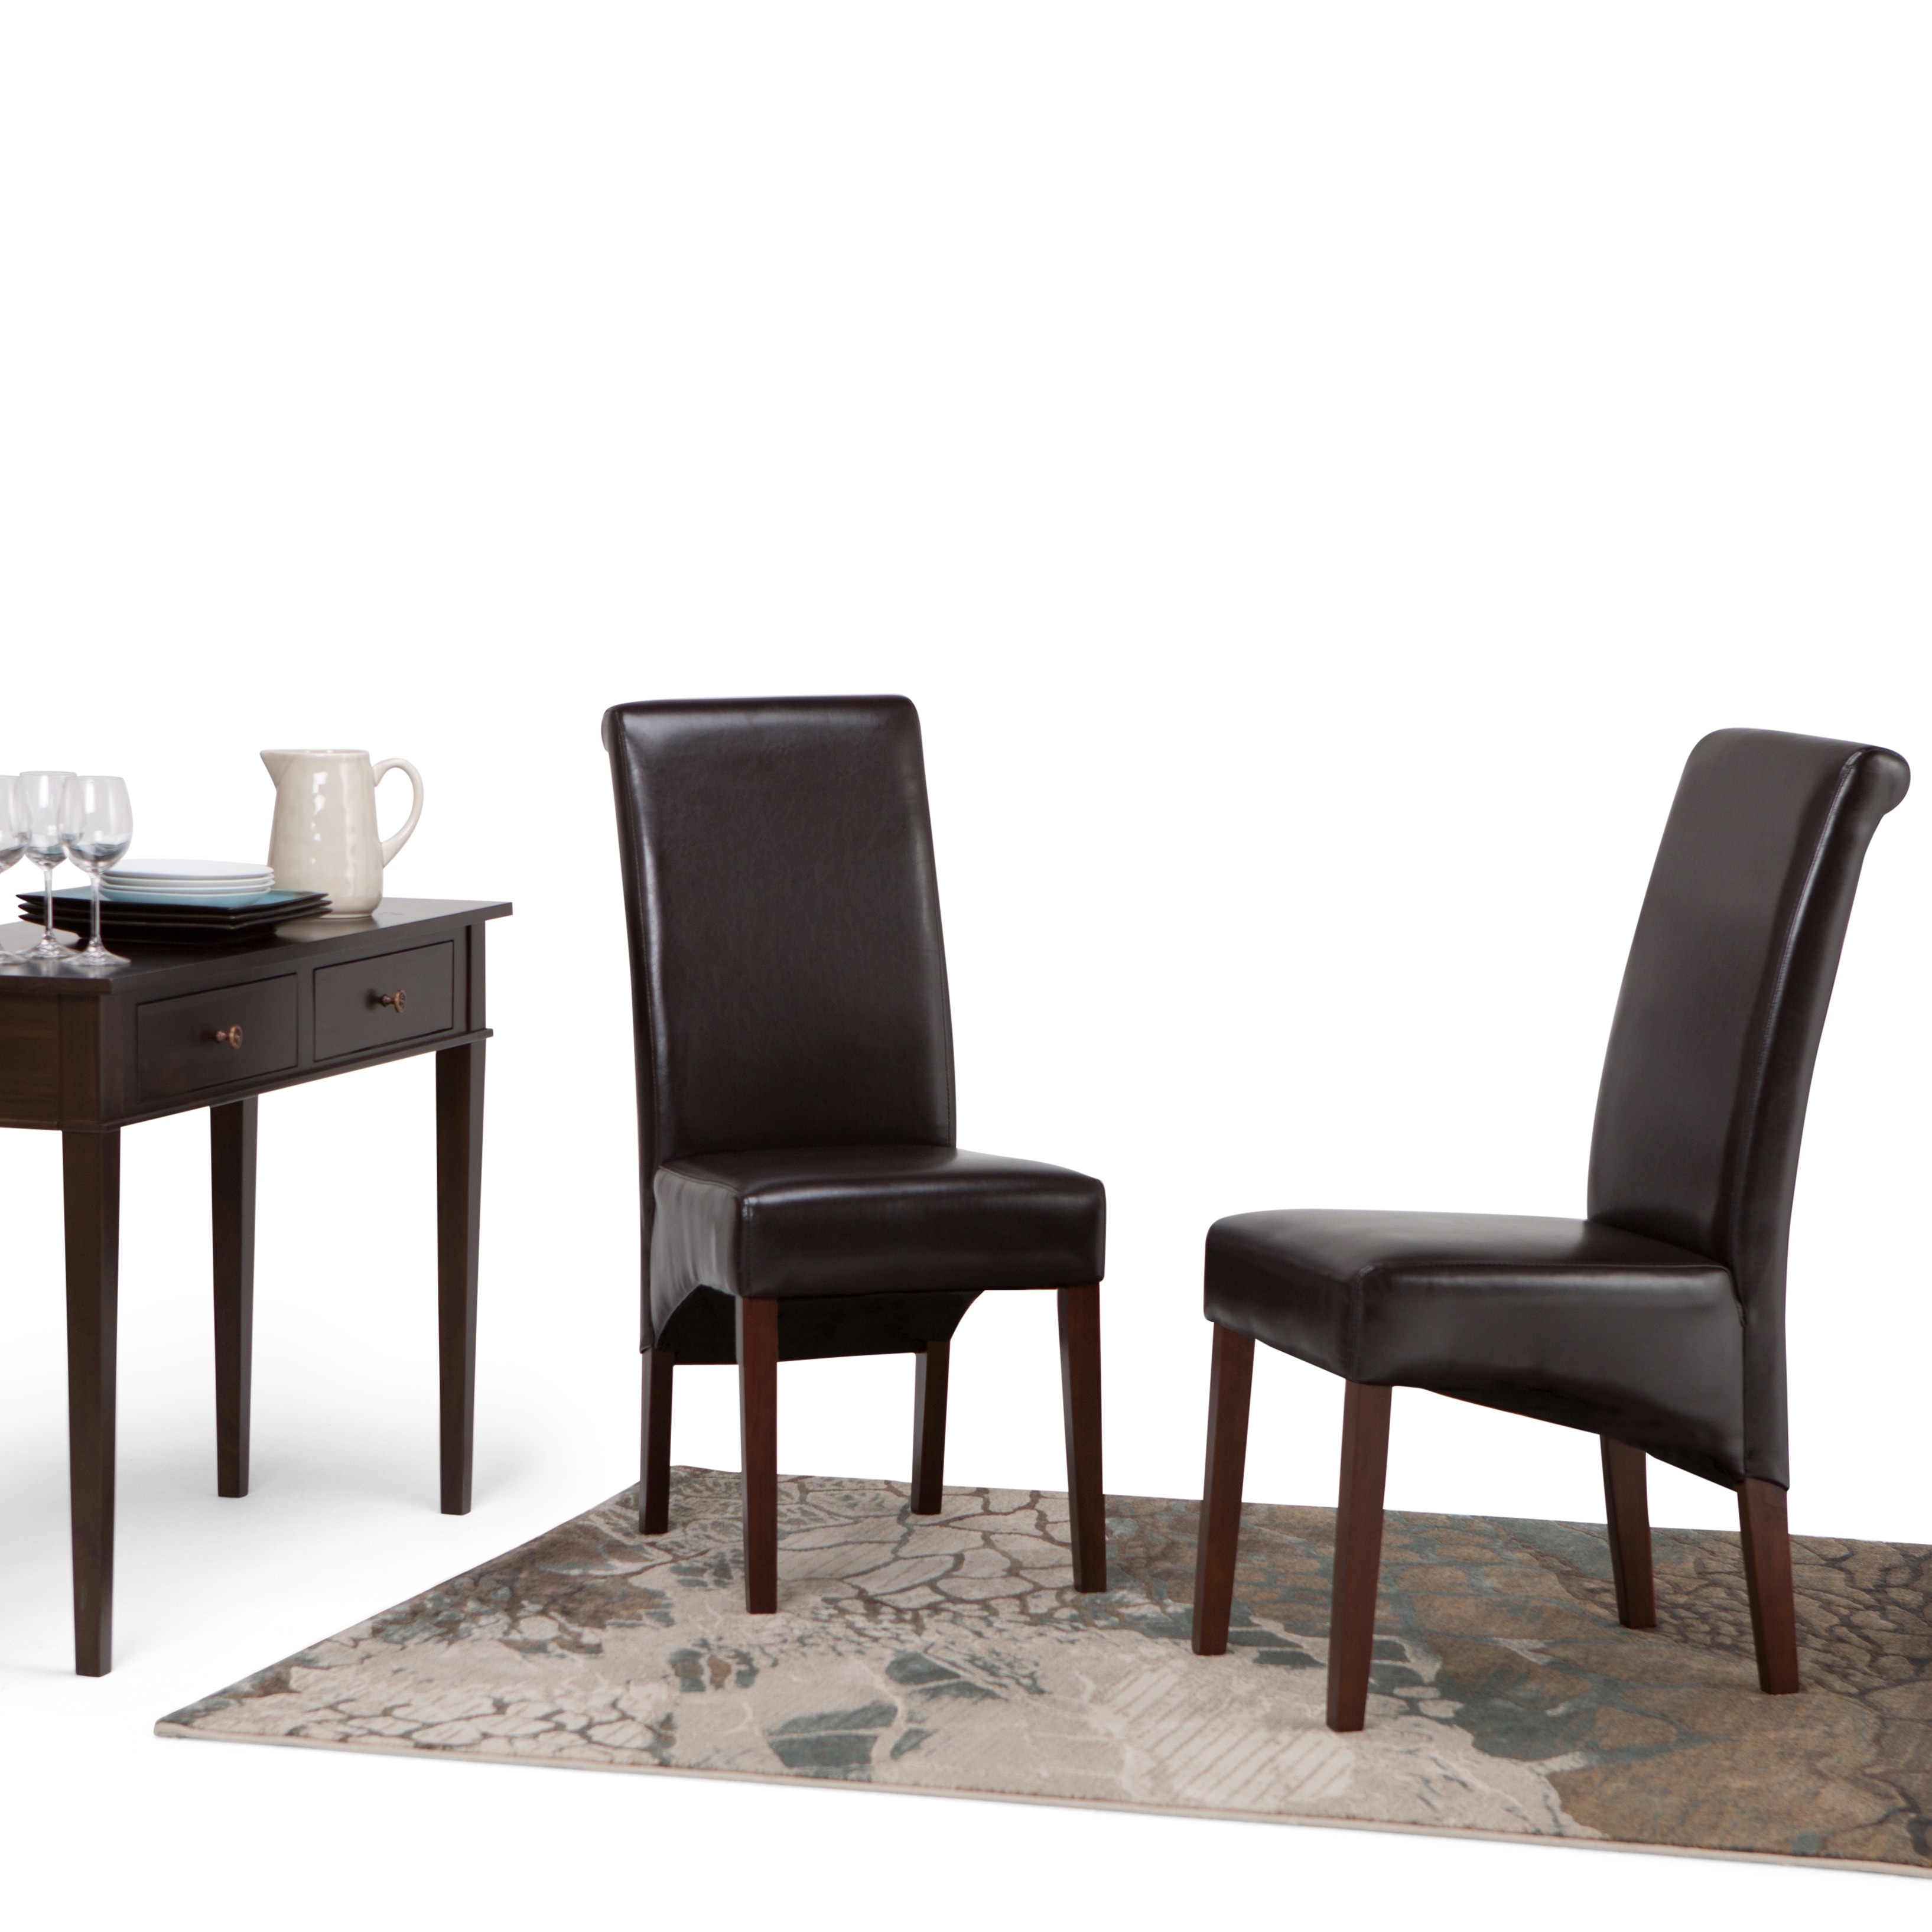 Franklin Dark Brown Leatherette Parson Chairs (Set of 2) Today $137